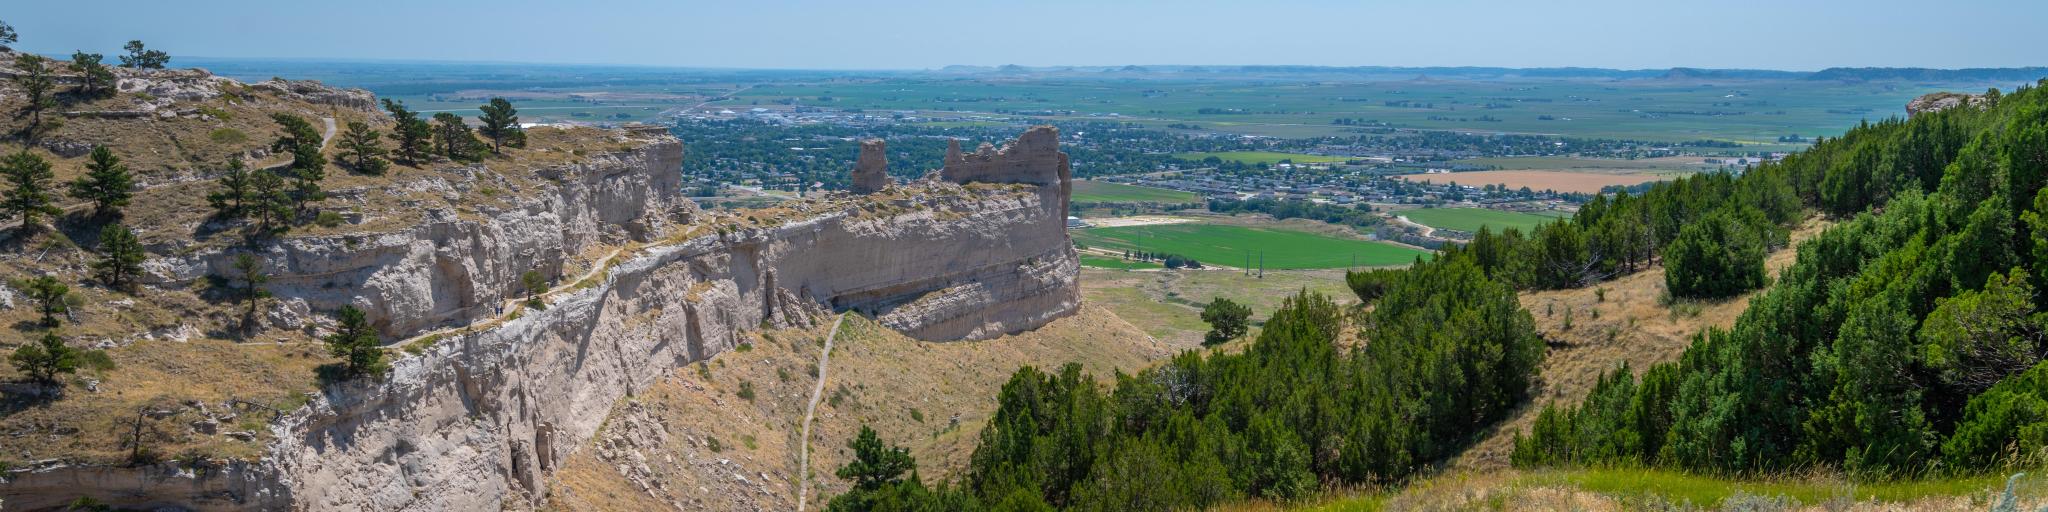 Panoramic view across Scotts Bluff National Monument and surrounding green and rugged landscape on clear day.